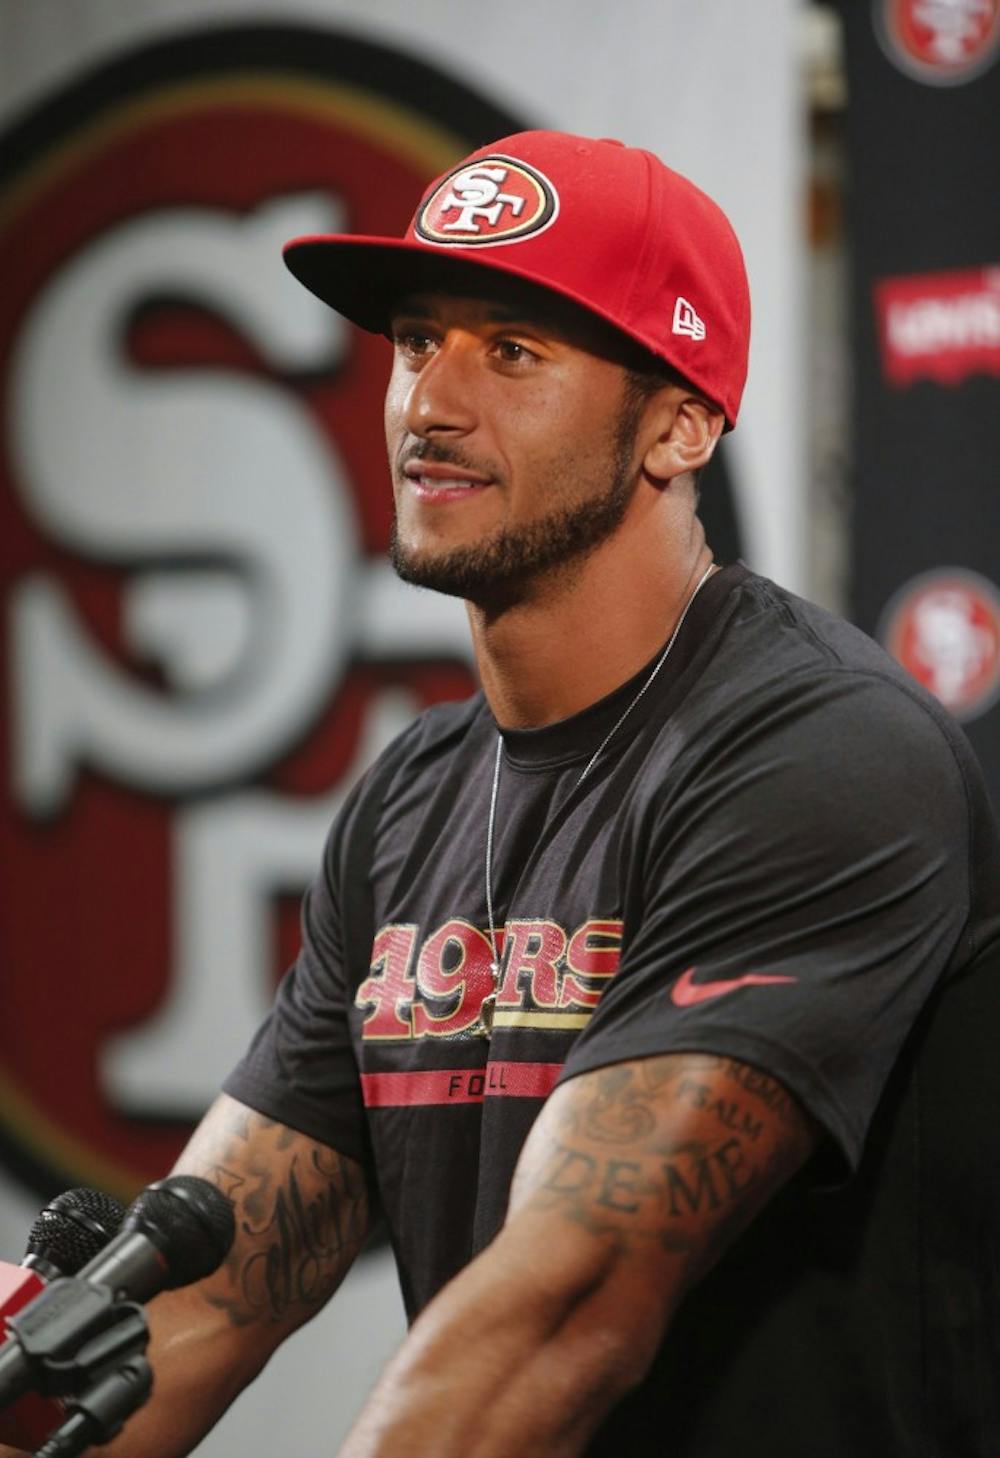 Quarterback Colin Kaepernick smiles as he talks about signing a six-year contract extension with the San Francisco 49ers in Santa Clara, Calif., on Wednesday, June 4, 2014. The contract is worth more than $110 million,  including a record $61 million guaranteed. (John Green/Bay Area News Group/MCT)